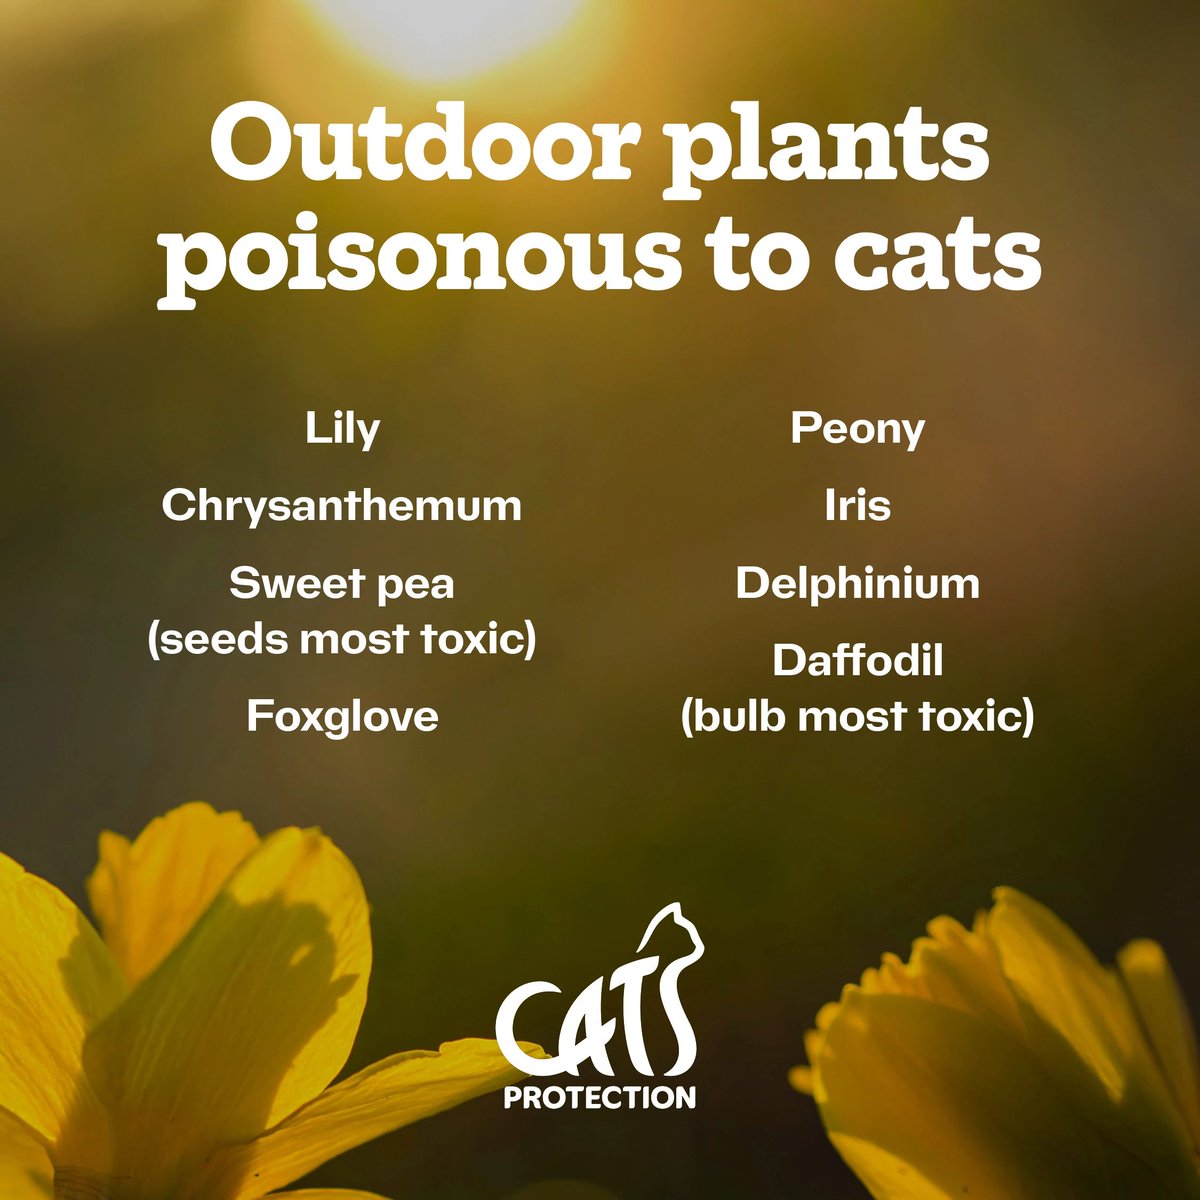 You may be finally getting out into the garden and flexing your horticultural muscles, but there are some plants that cat owners should be aware of. Find our full list of cat-safe and toxic outdoor plants here: spr.ly/OutdoorPlants 🍃